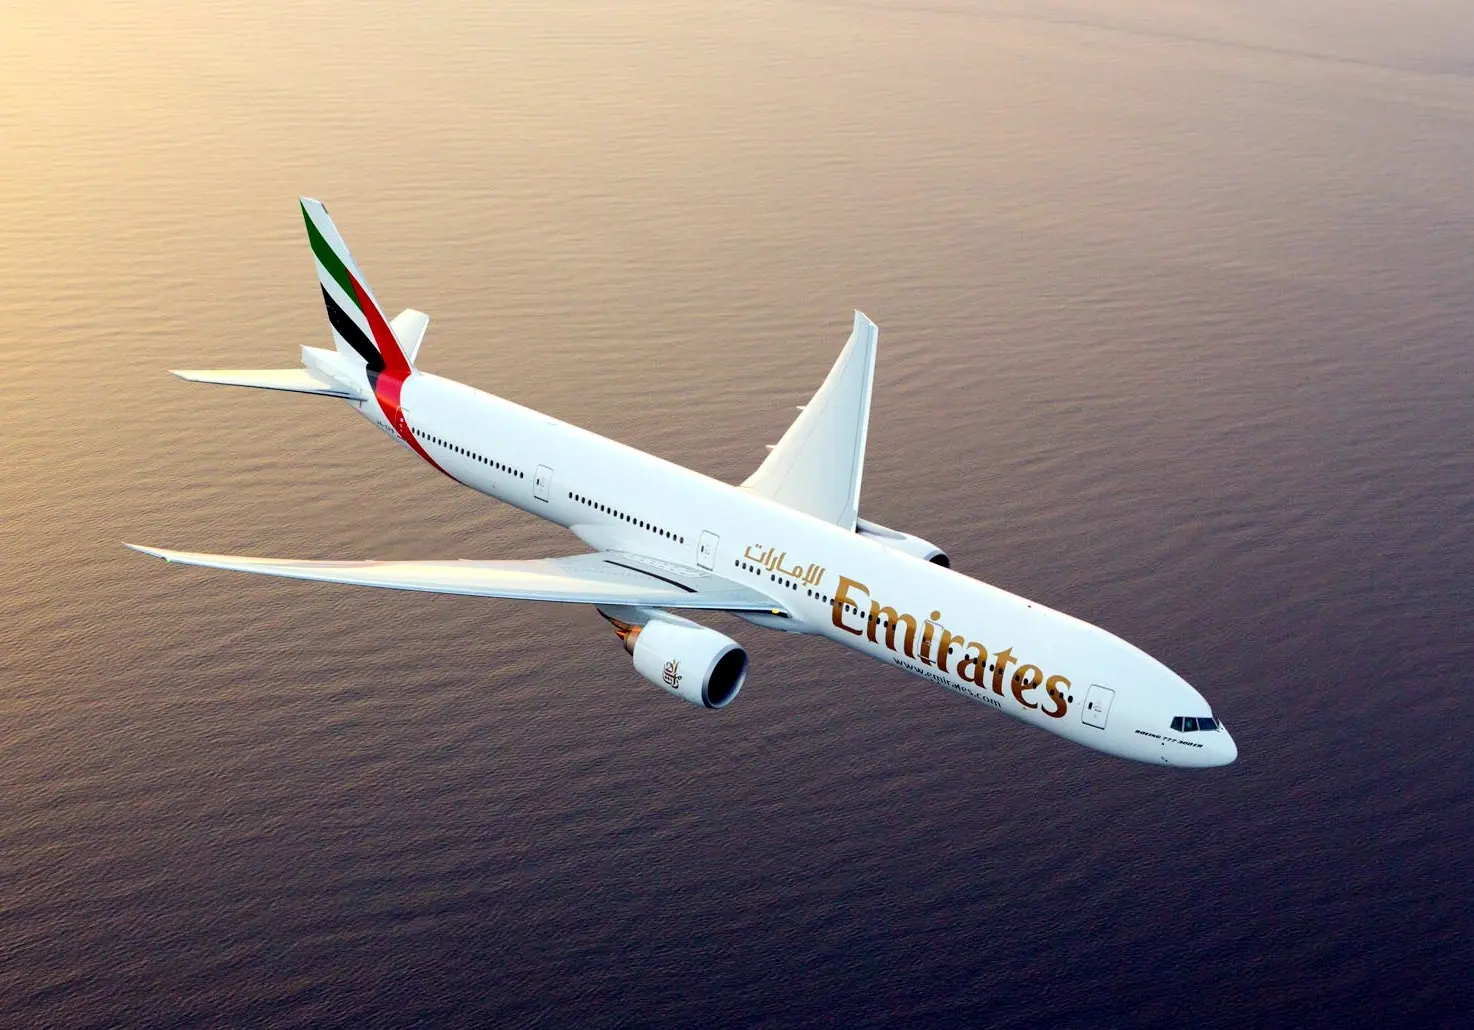 Emirates to resume flights to Johannesburg, Cape Town, Durban, Harare and Mauritius, boosting global network to 92 destinations